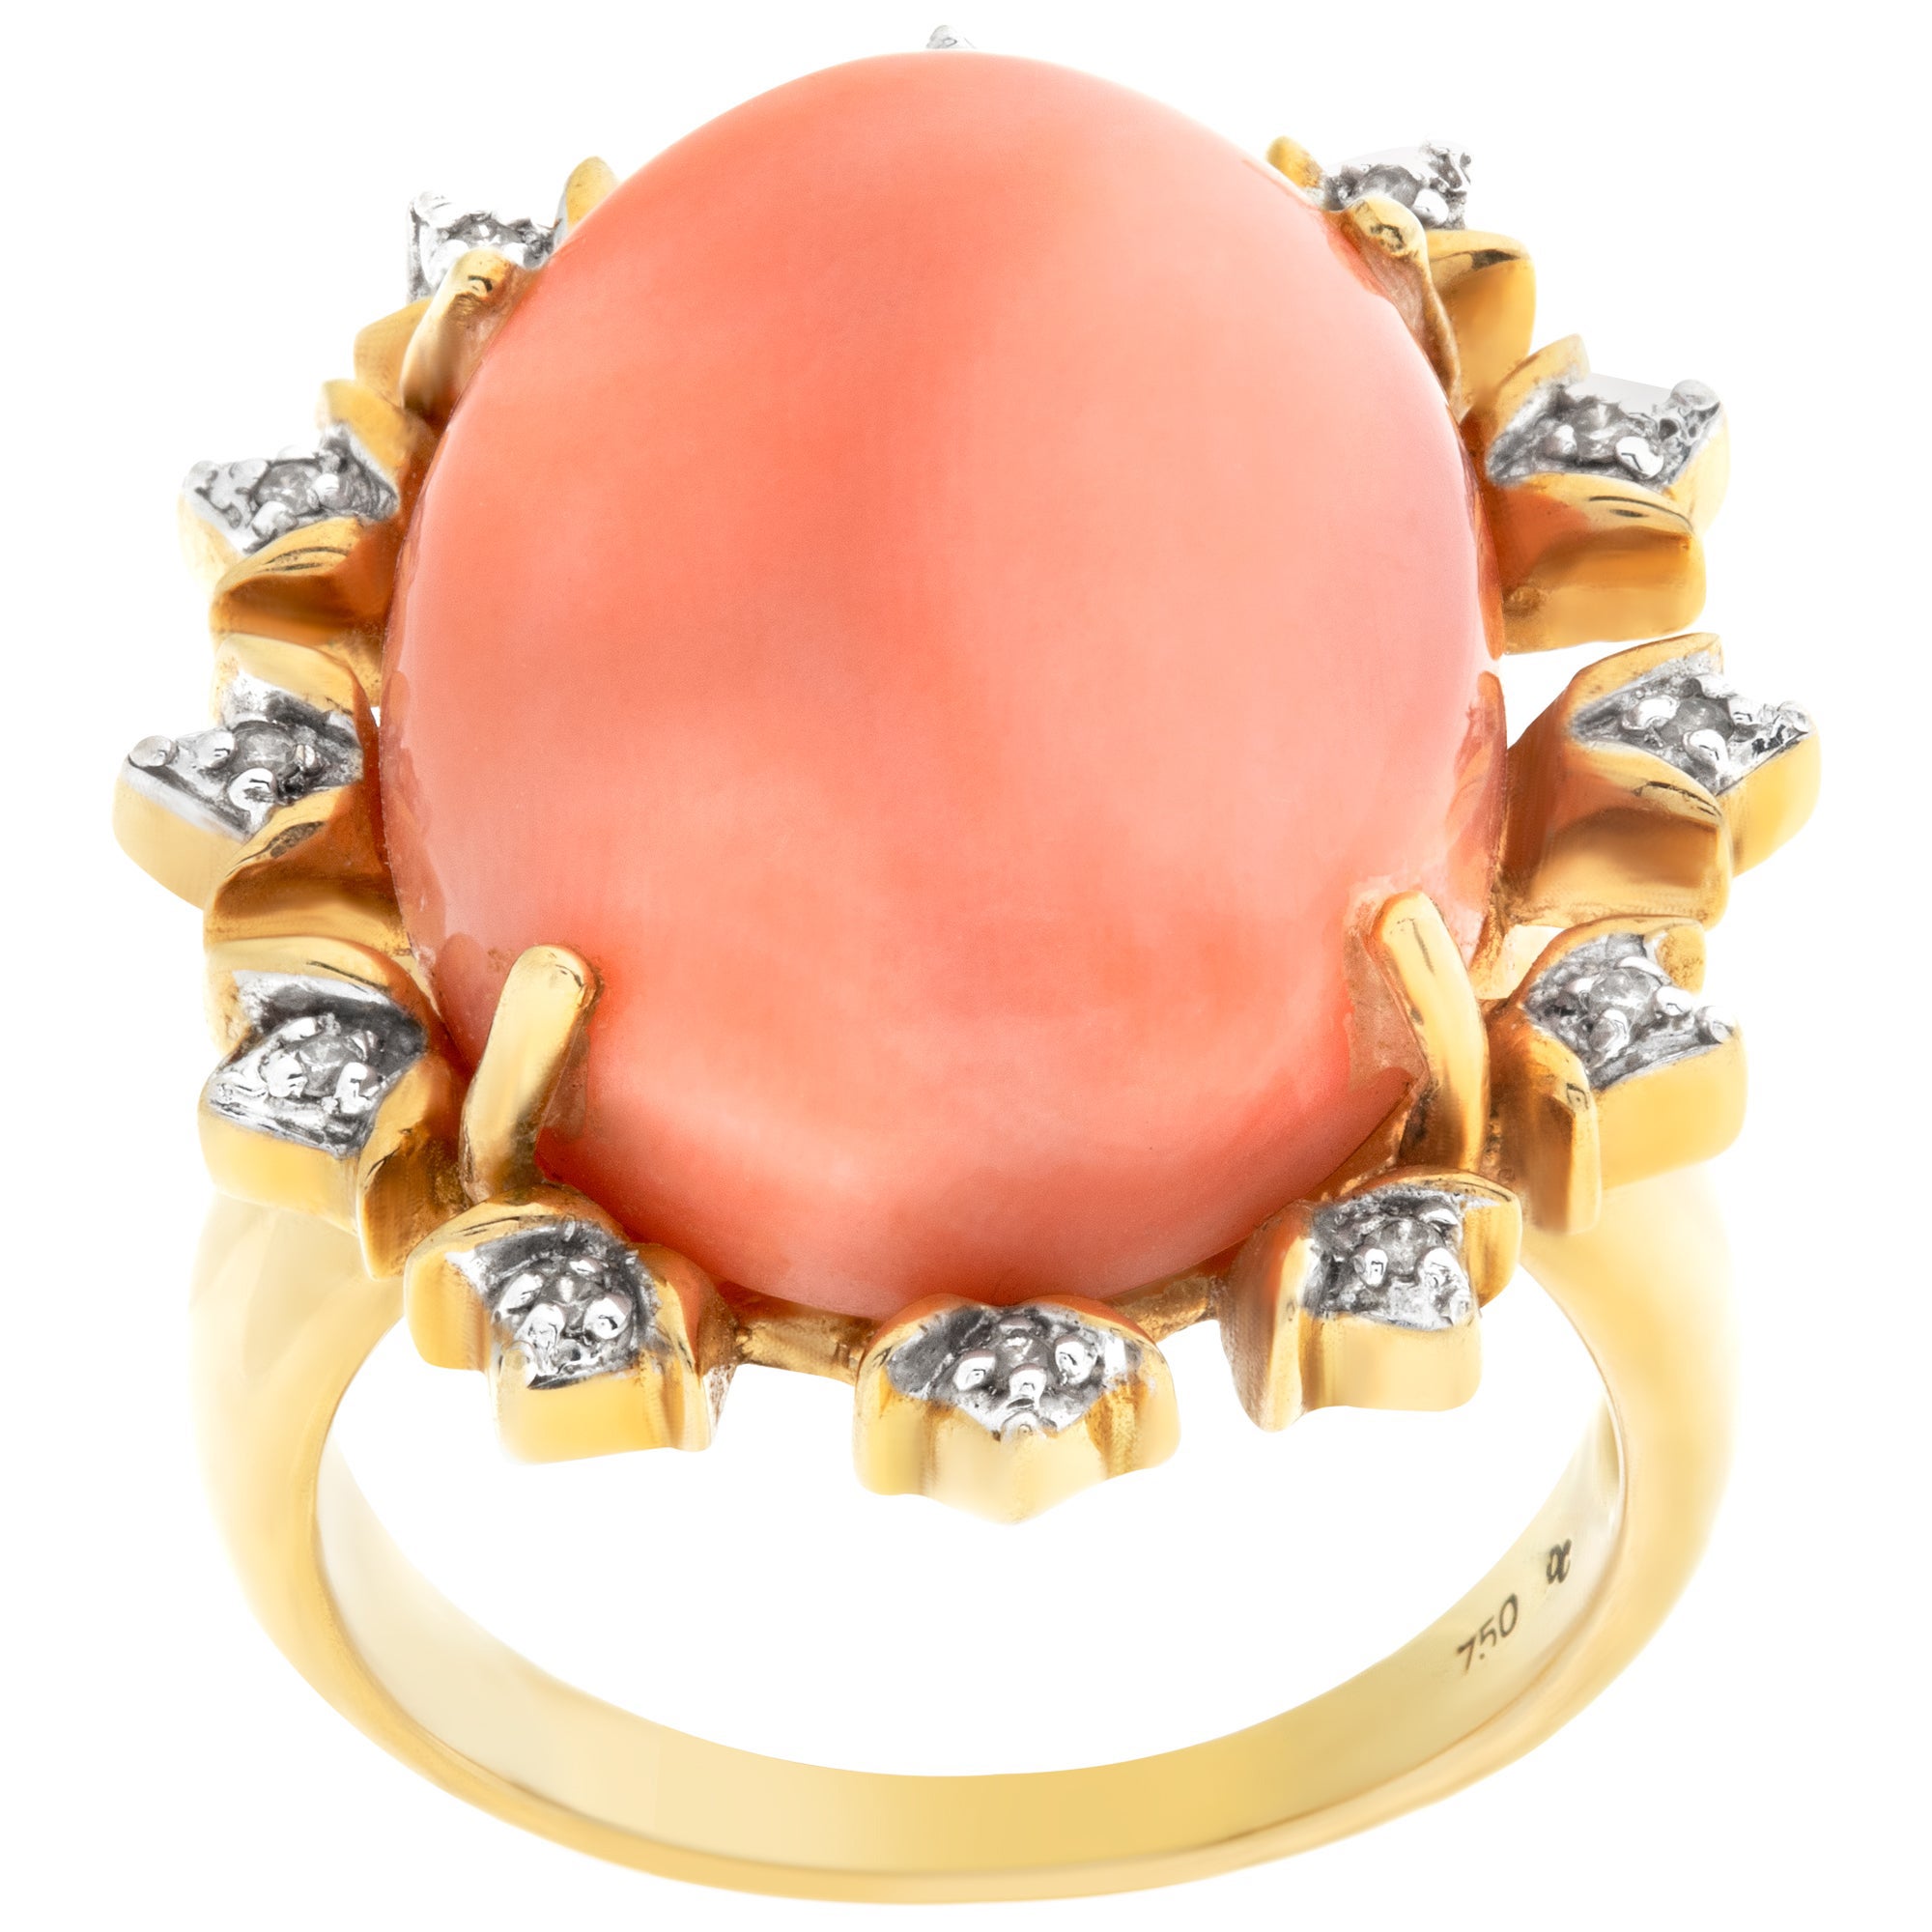 Peachy Keen Coral Ring in 18k Yellow Gold with Diamond Accent Frame